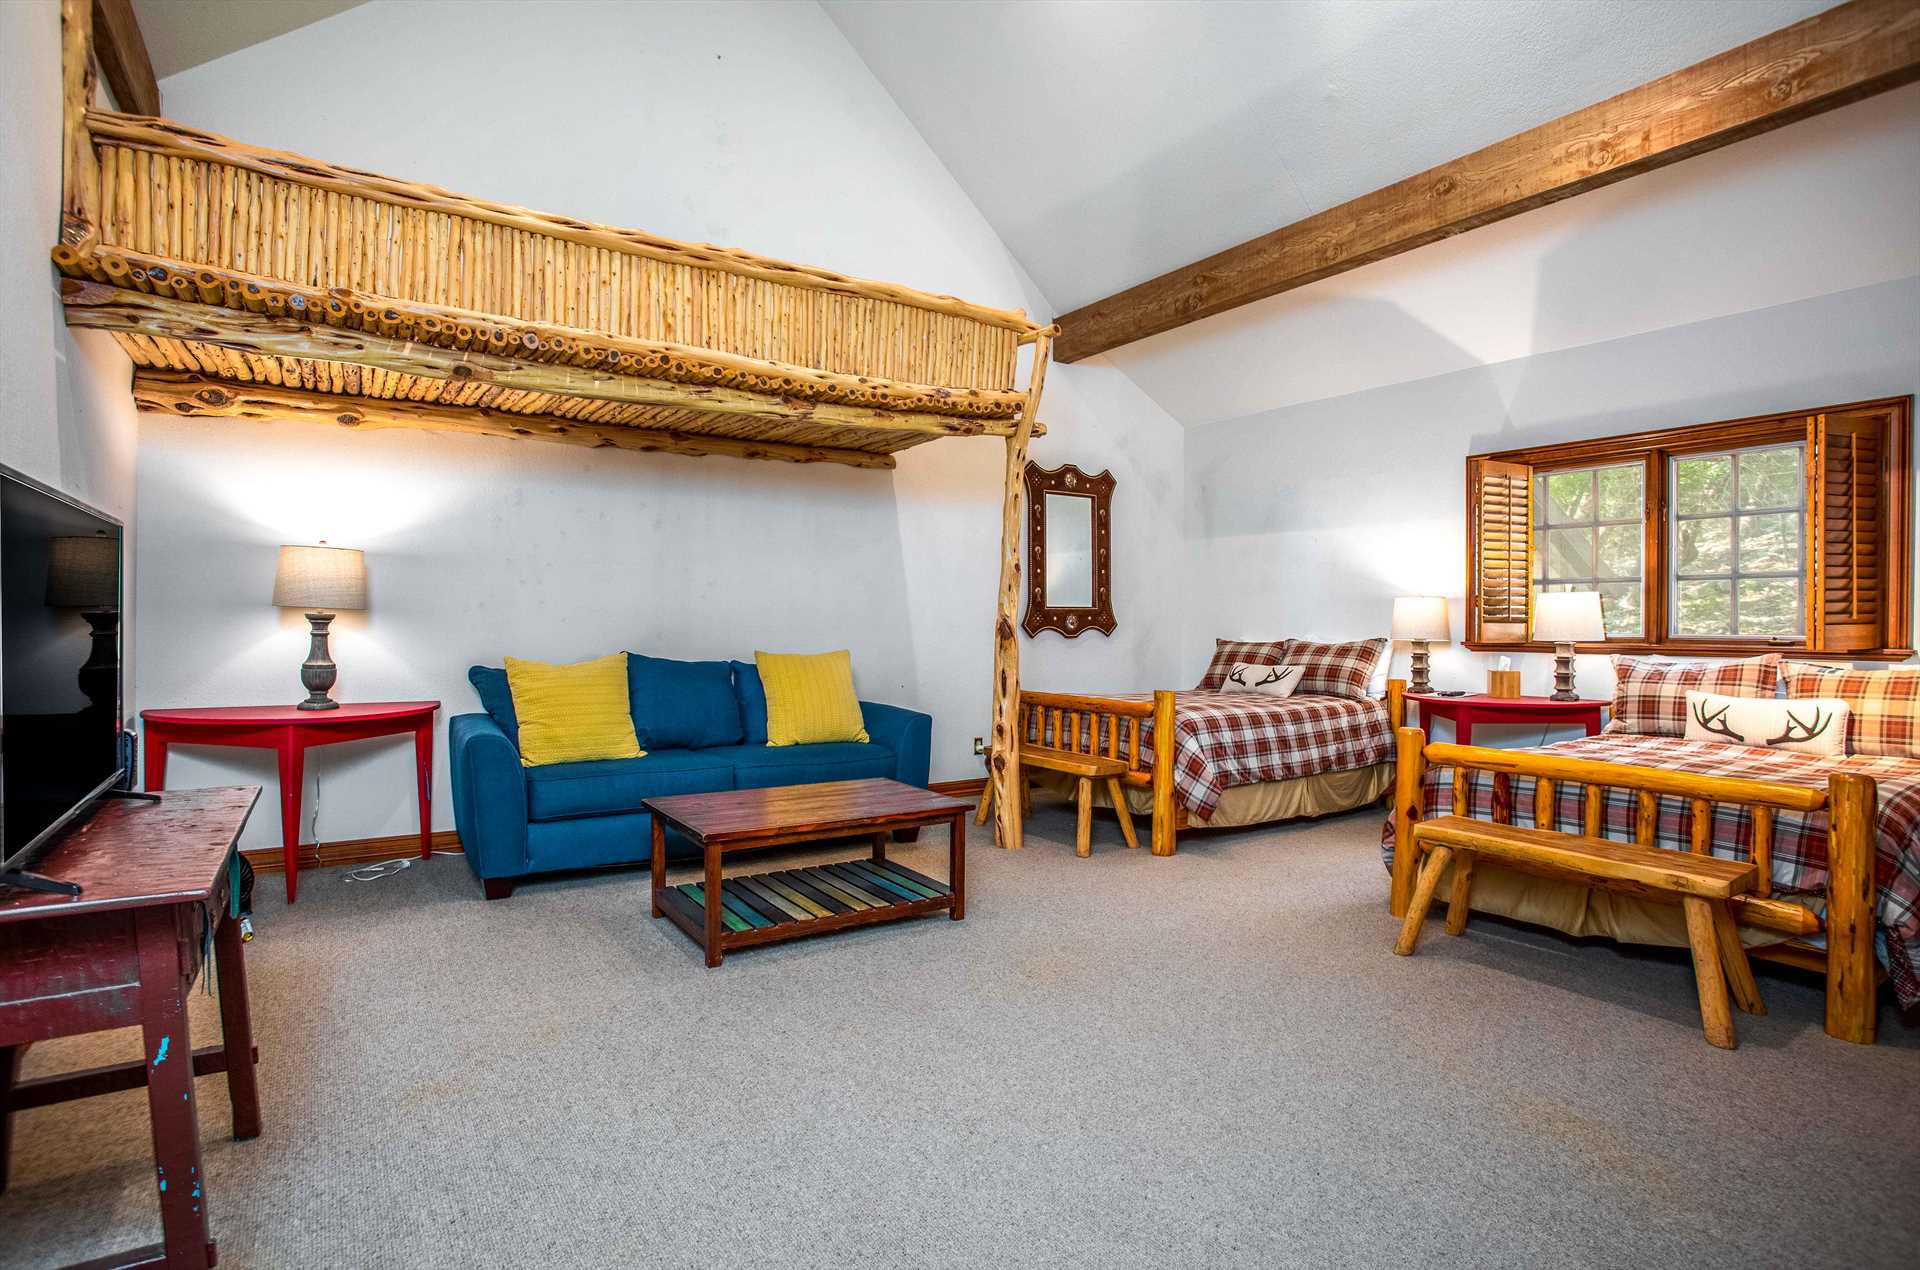                                                 The first bedroom at the Homestead has two twin beds and a double sleeper sofa, offering comfortable rest for up to six people. All the beds on all three properties here come with clean and fresh linens, too!